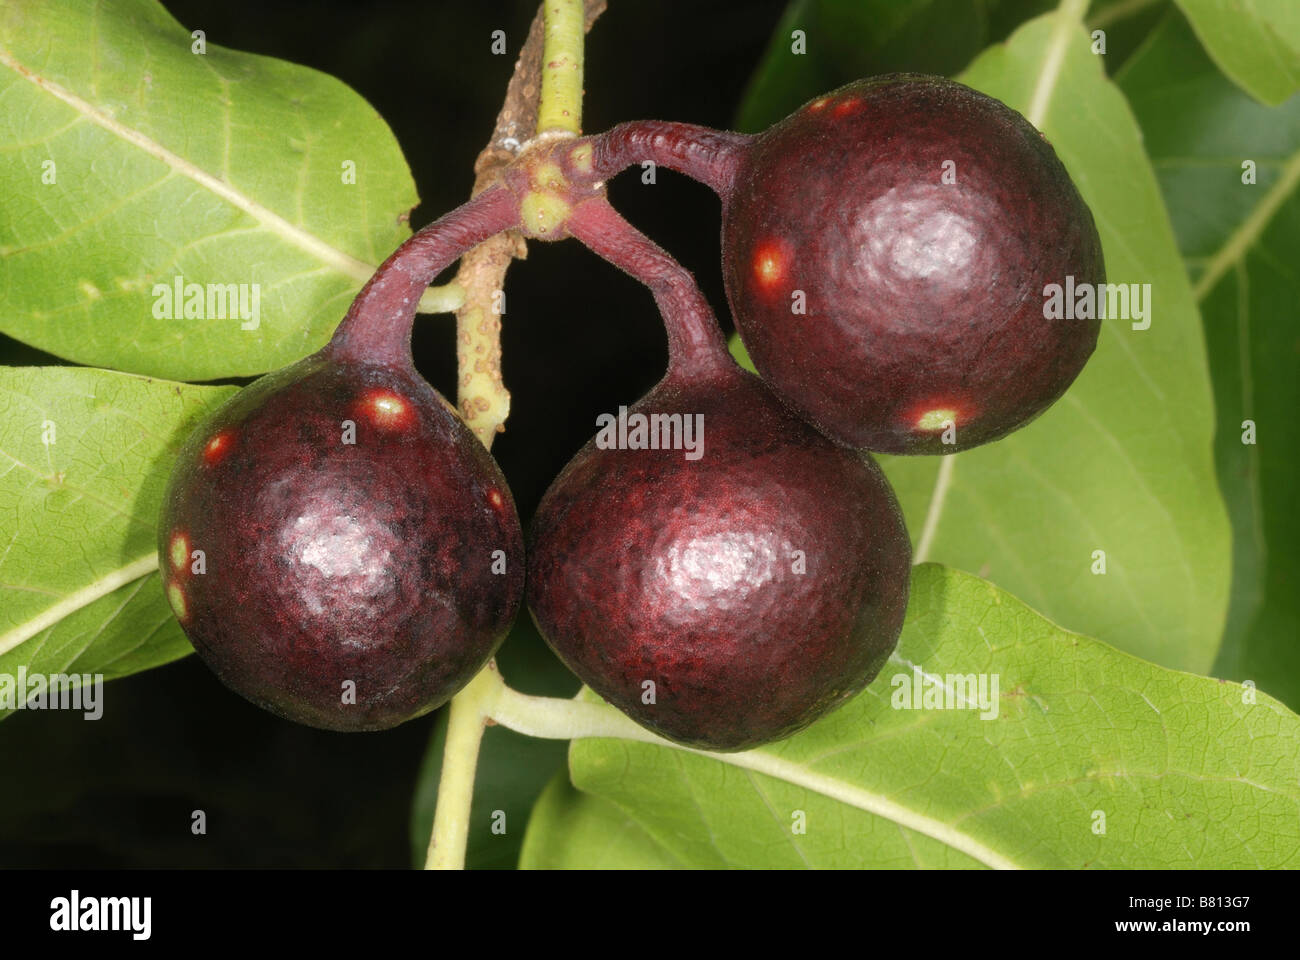 Ripe fruit of Miliusa tomentosa. The ripe fruit are eaten by local people as well as wild animals in these forests. Stock Photo